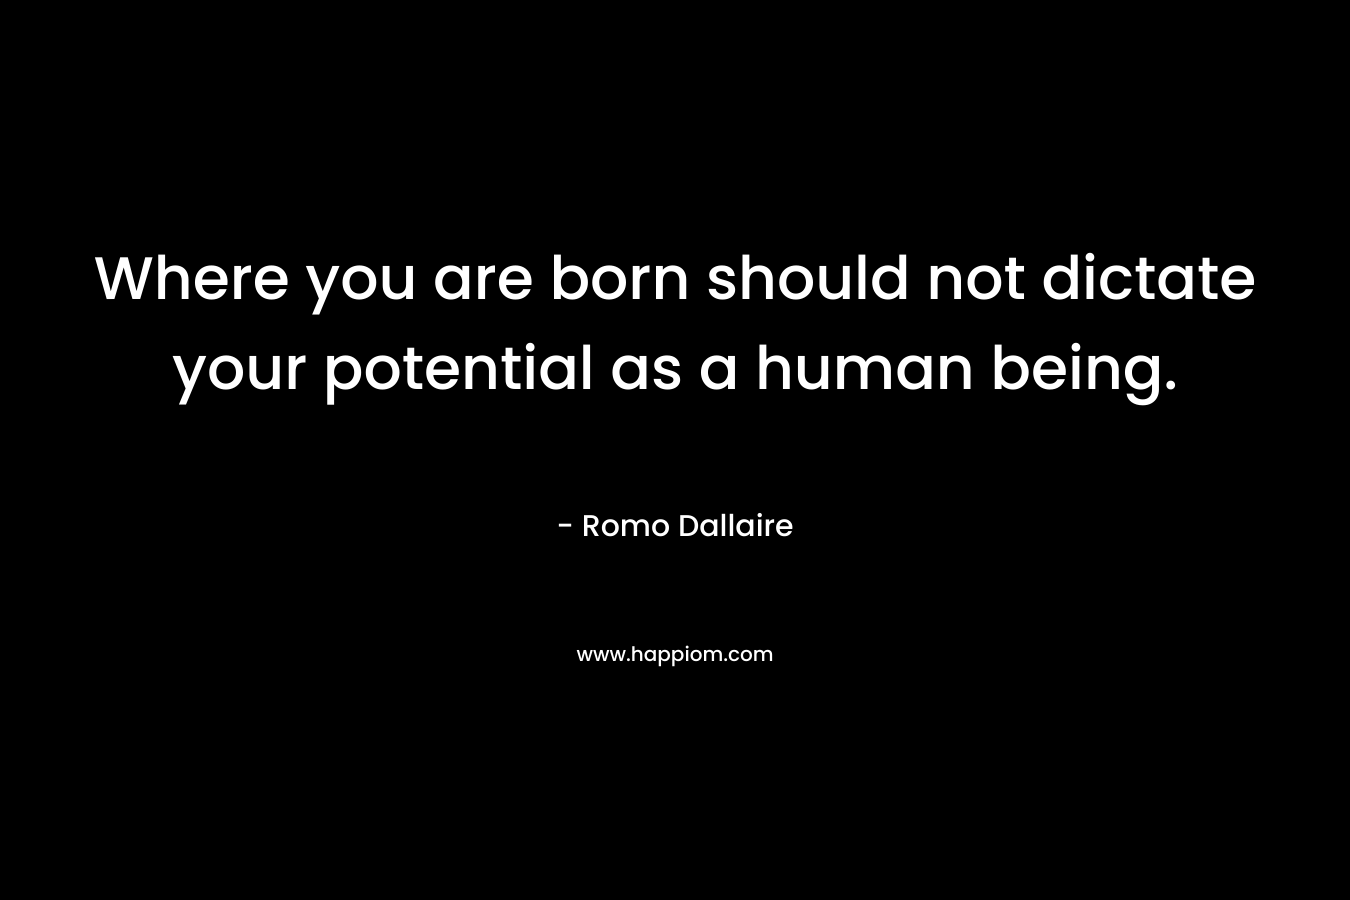 Where you are born should not dictate your potential as a human being. – Romo Dallaire